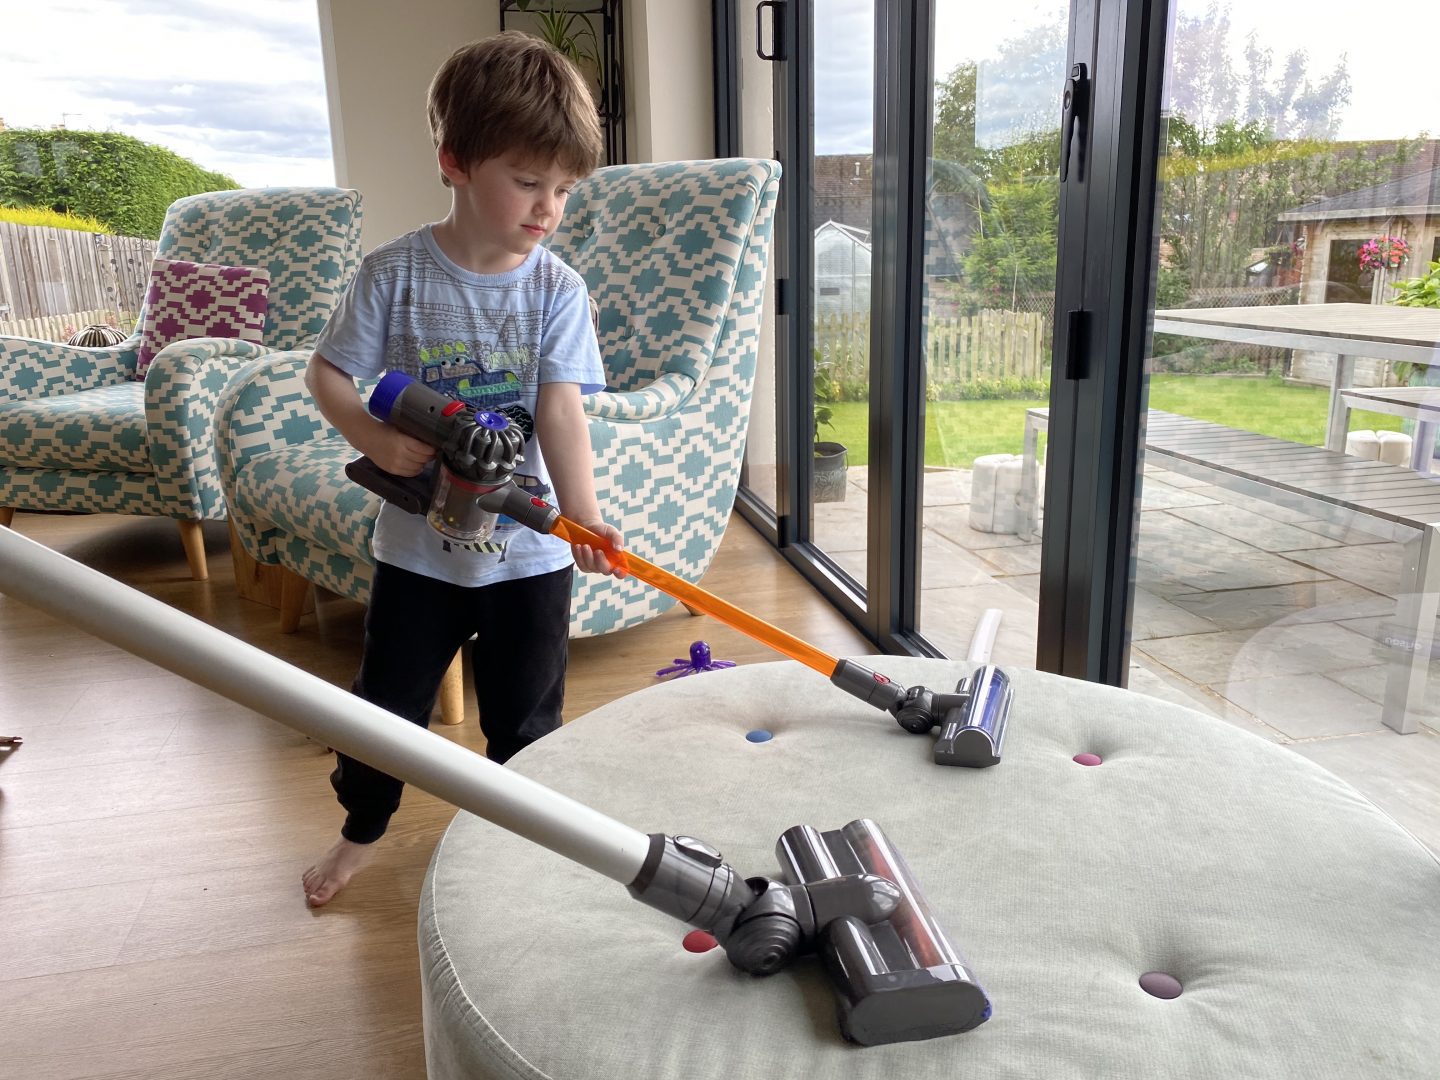 A boy using a toy Dyson cordless vacuum cleaner alongside a real one